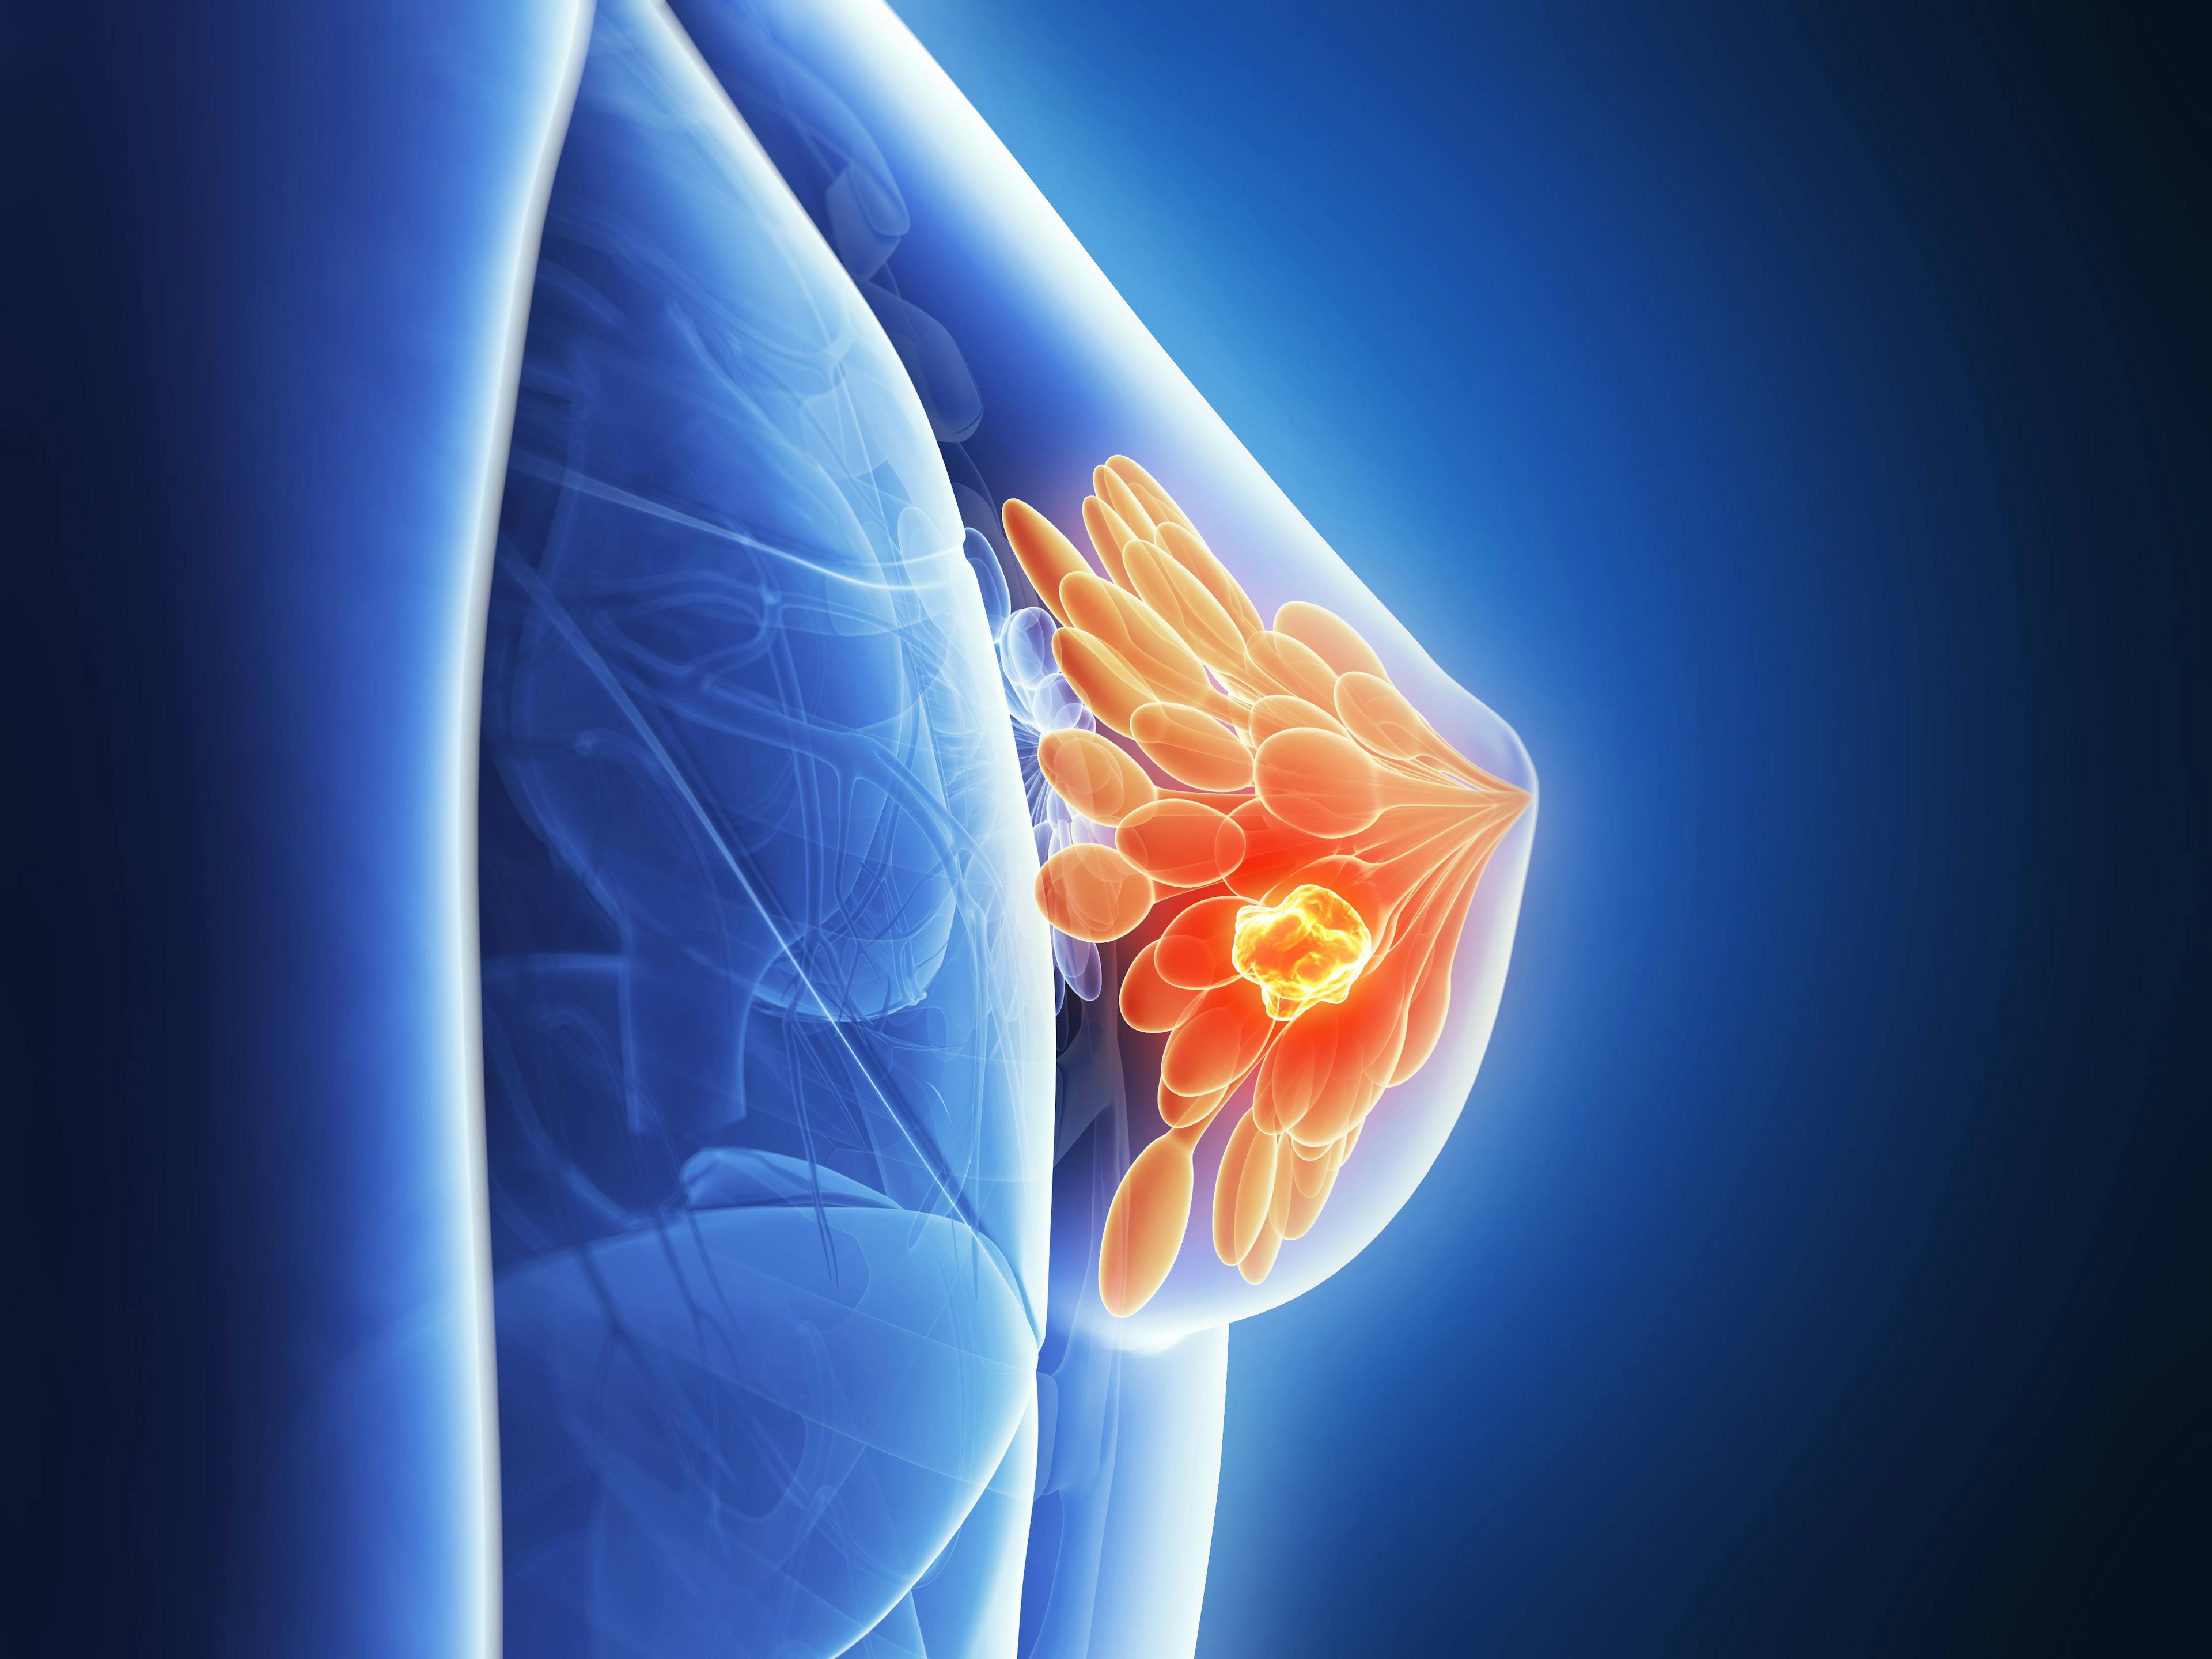 3D rendering of breast cancer